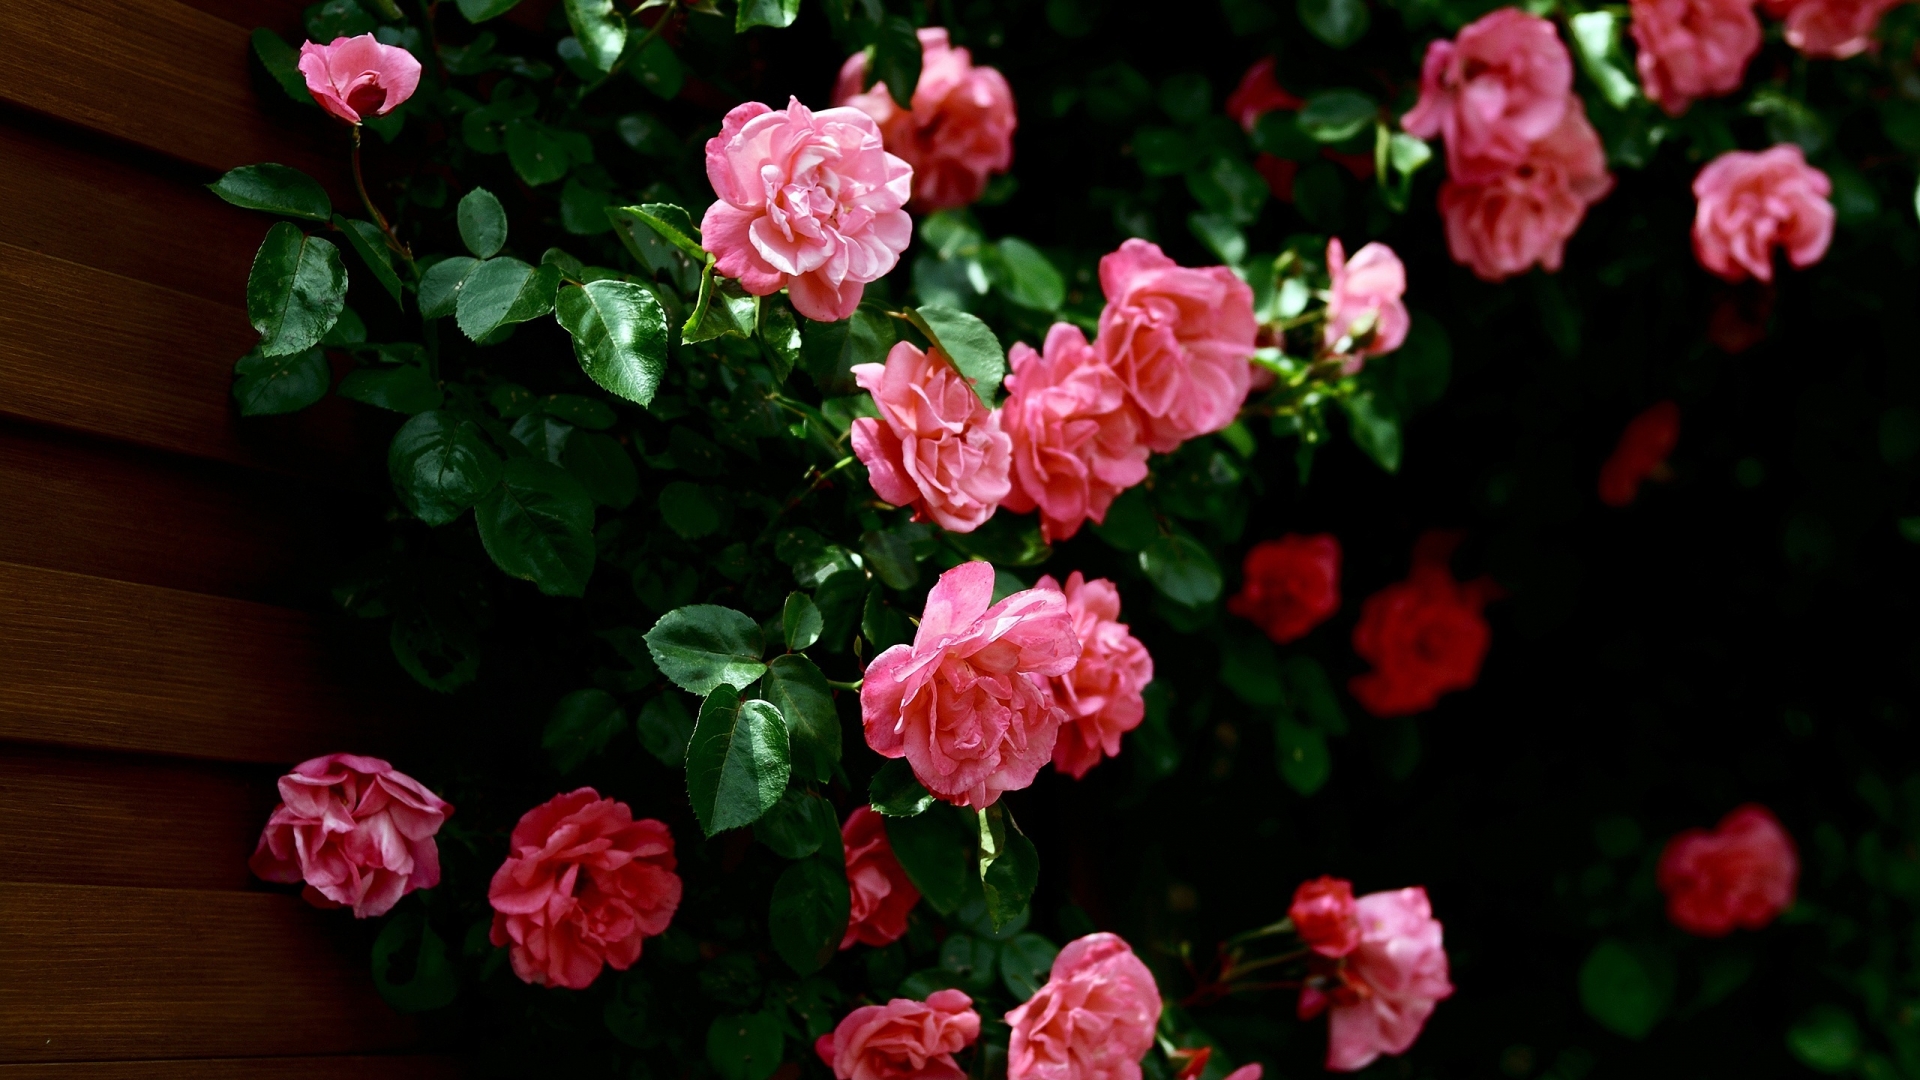 Very Nice Roses for 1920 x 1080 HDTV 1080p resolution